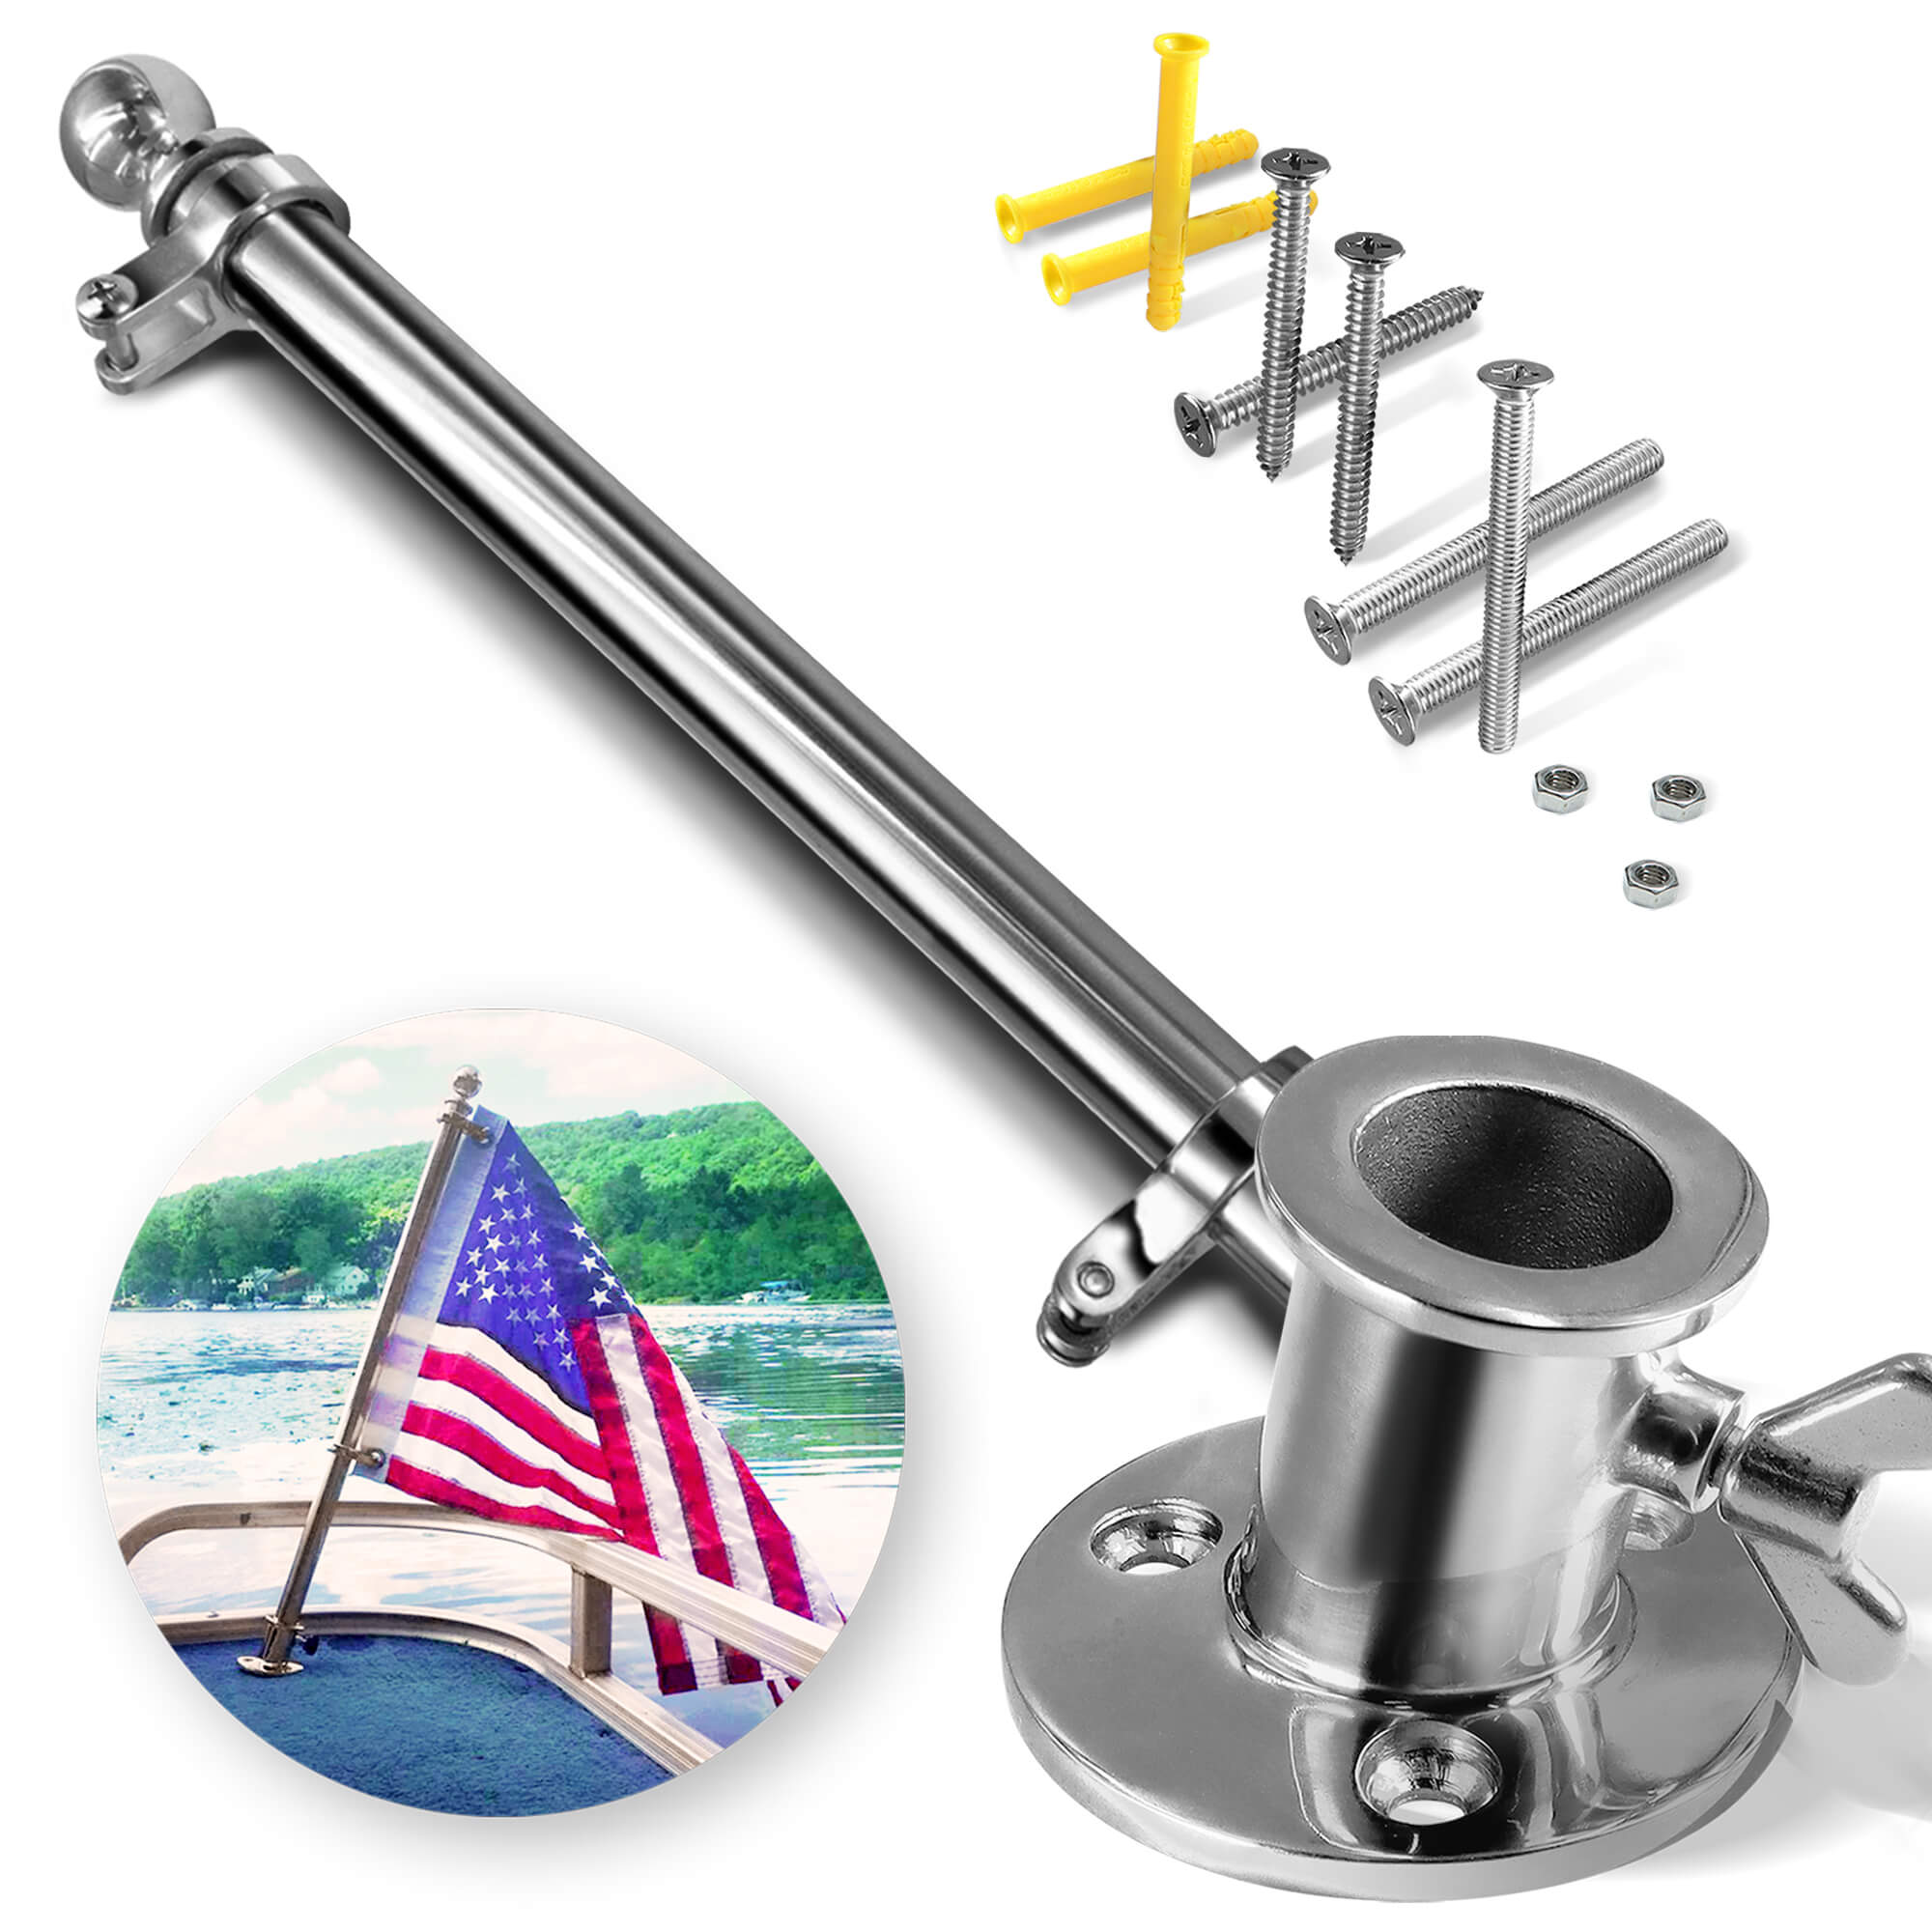 Prairie Metal Rail Mounted Flag Pole Stainless Steel Flagpole for Marine Boat Truck RV Fit Rail 7/8 ~ 1-1/4 